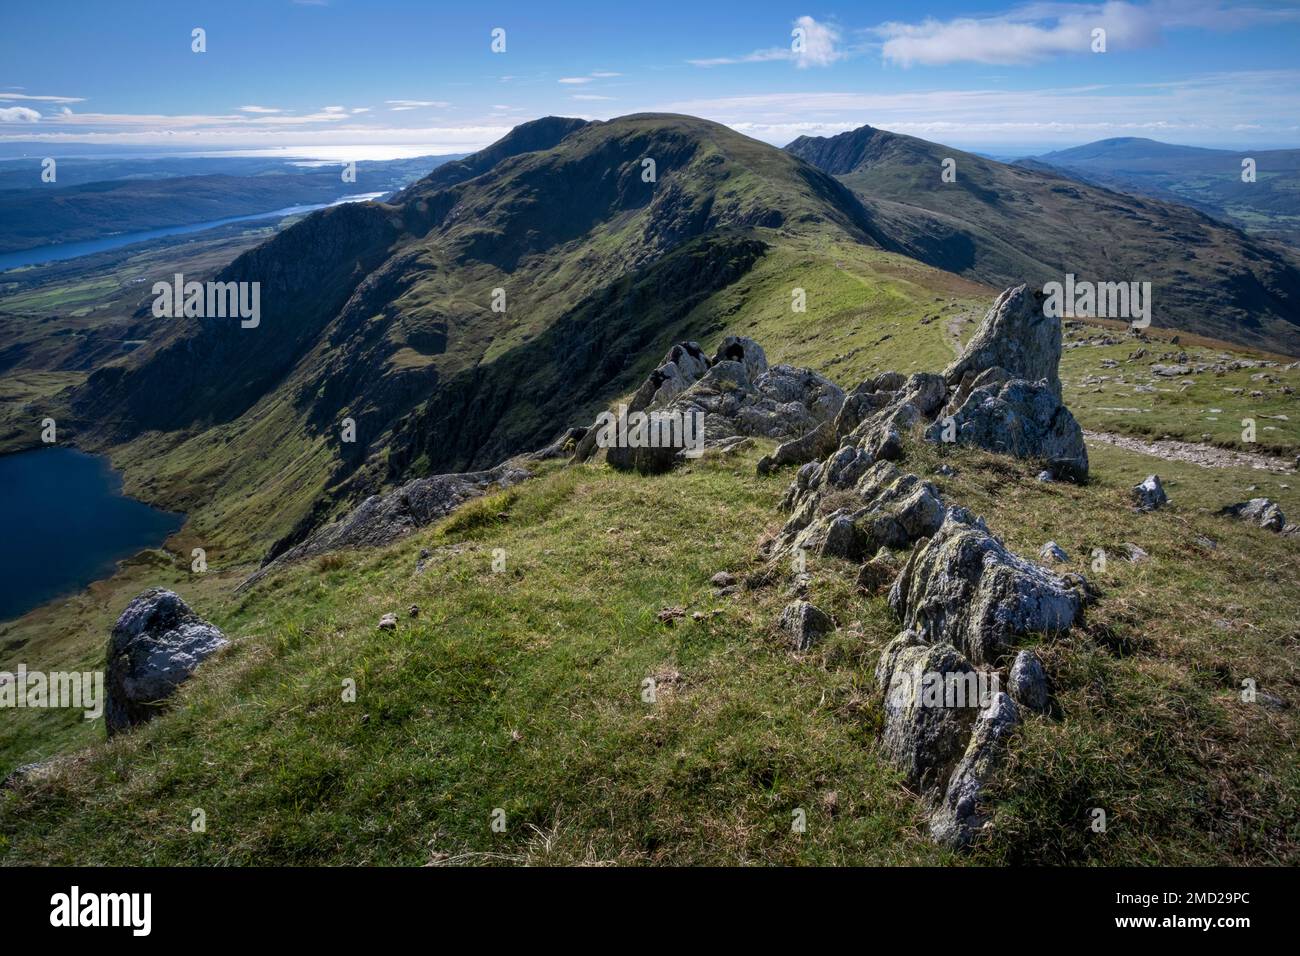 The Old Man of Coniston, Levers Water and Coniston Water from Little How Crags, Coniston Fells, Lake District National Park, Cumbria, England, UK Stock Photo